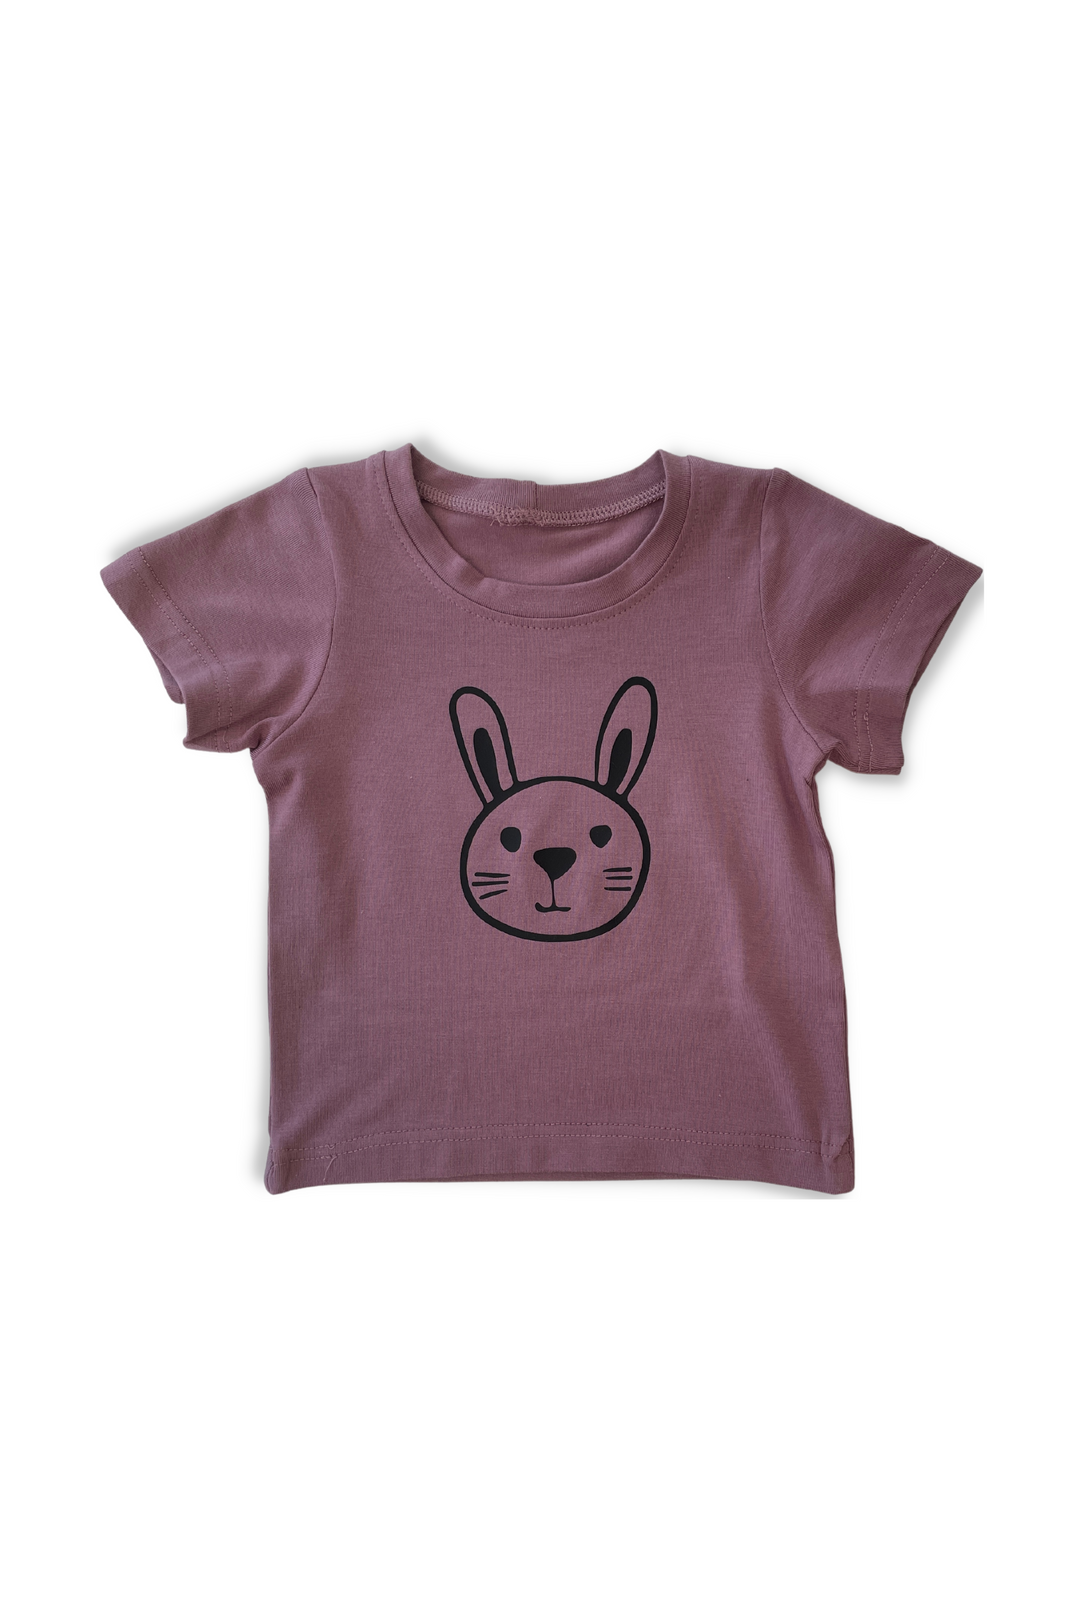 Baby t-shirt - Luc the bunny - Lilac